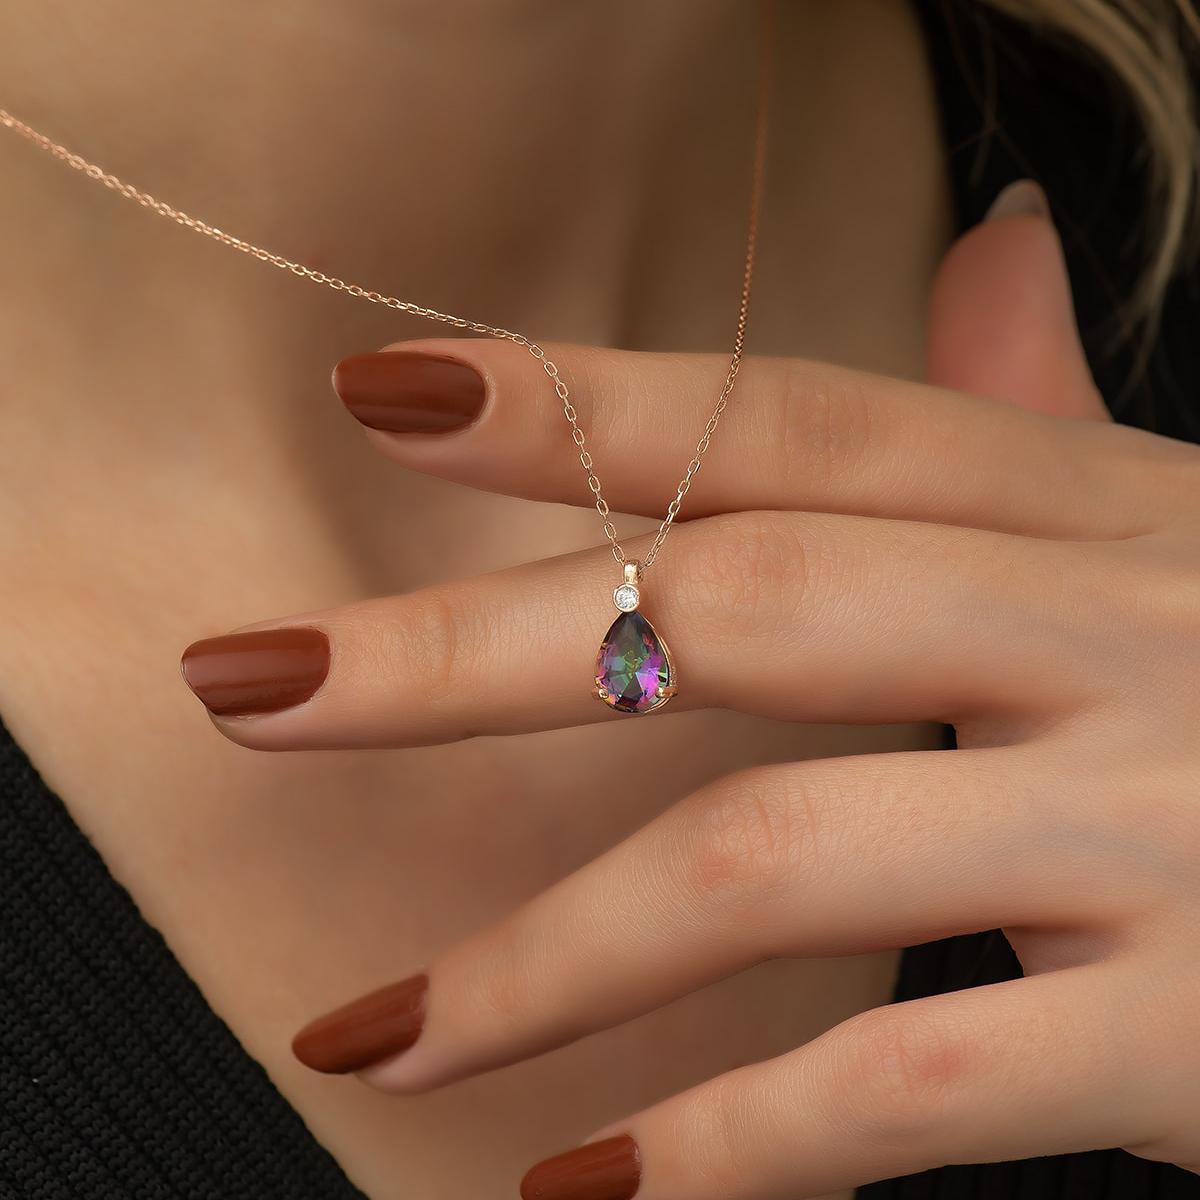 Mystic Fire Topaz Necklace • Mystic Topaz Solitare Necklace - Trending Silver Gifts